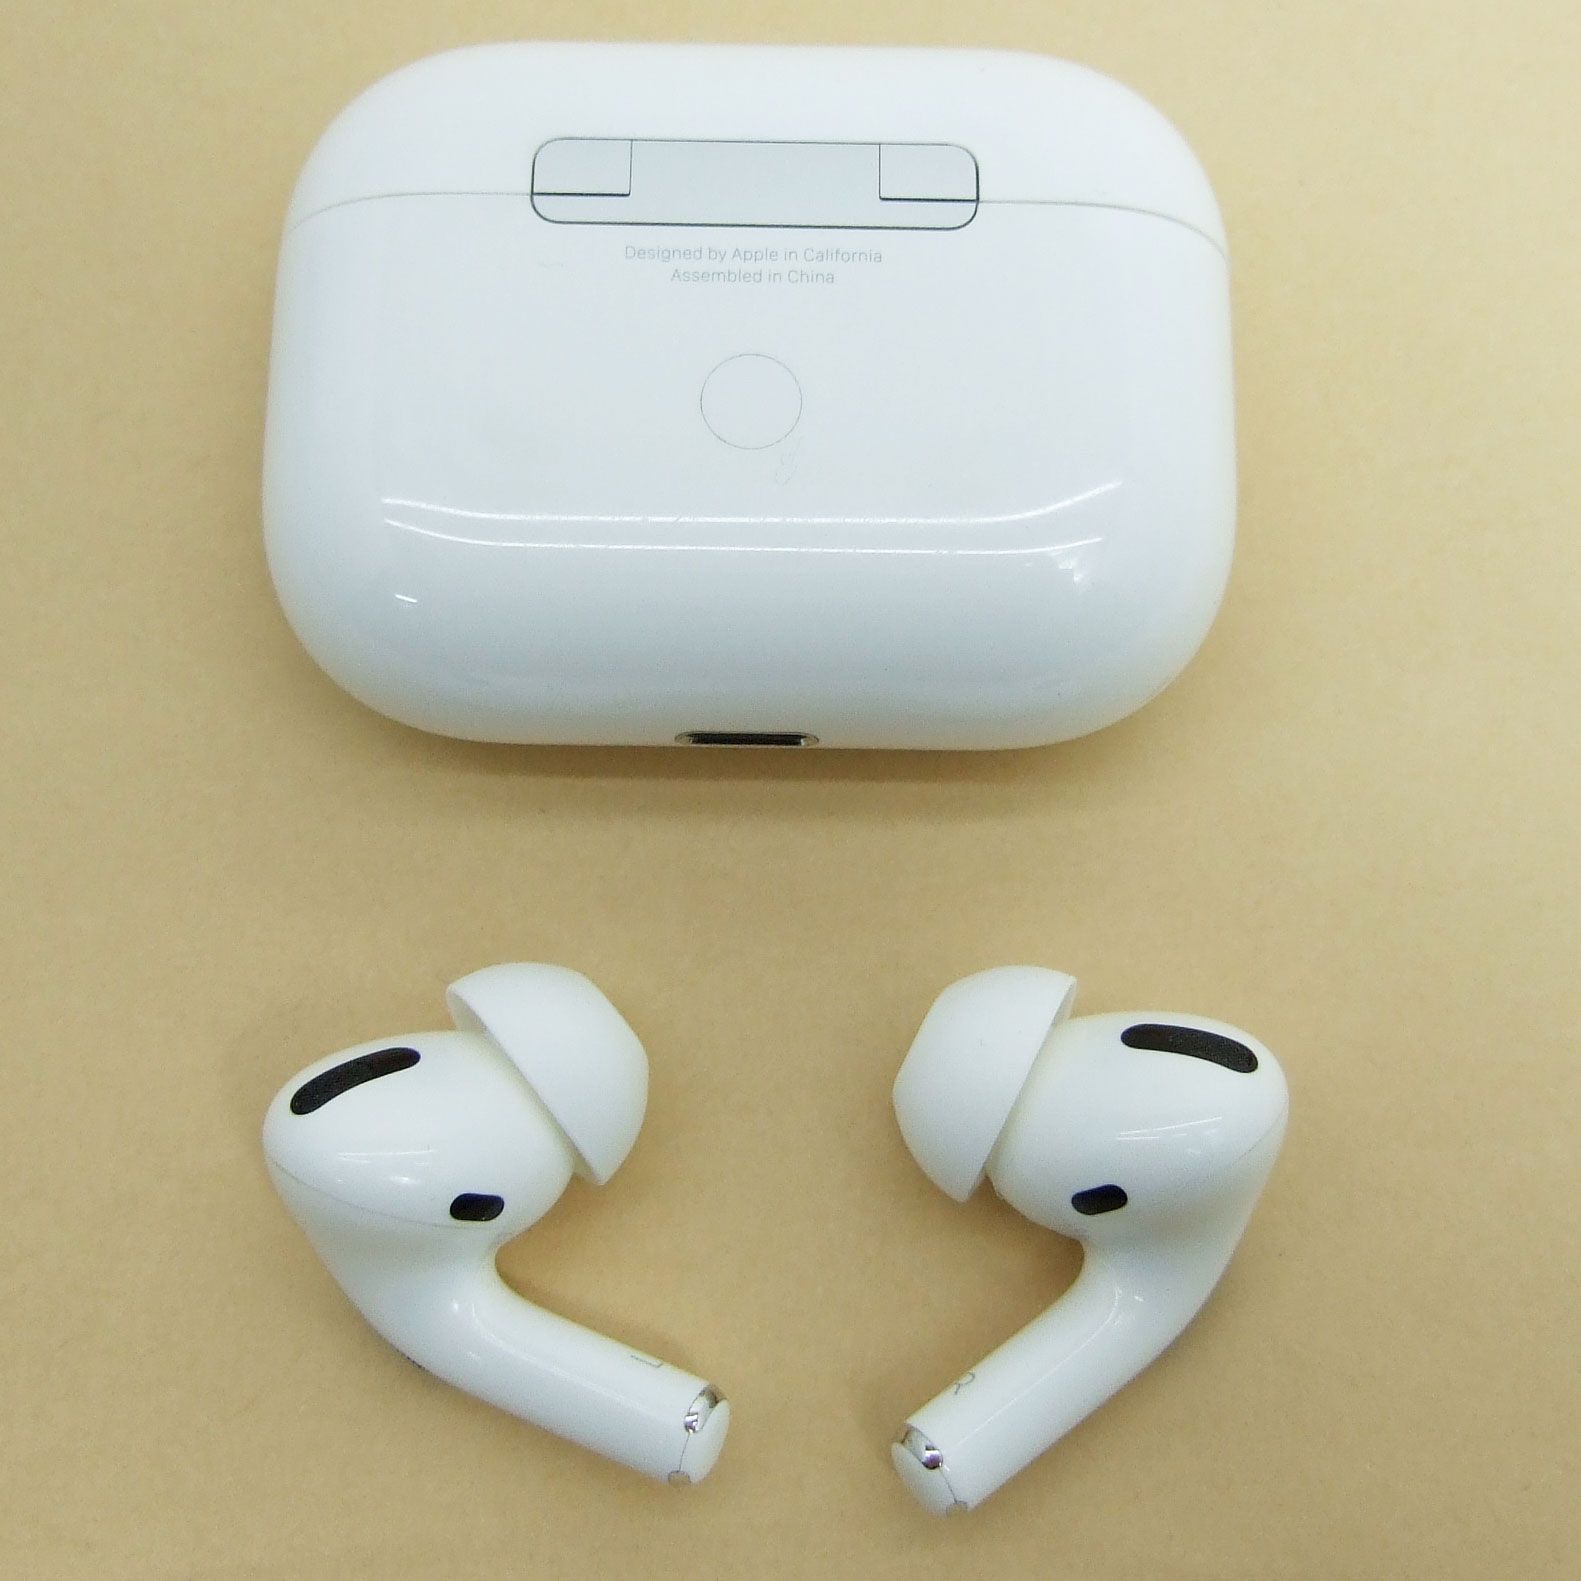 a15232個apple airpods セット　ジャンク品